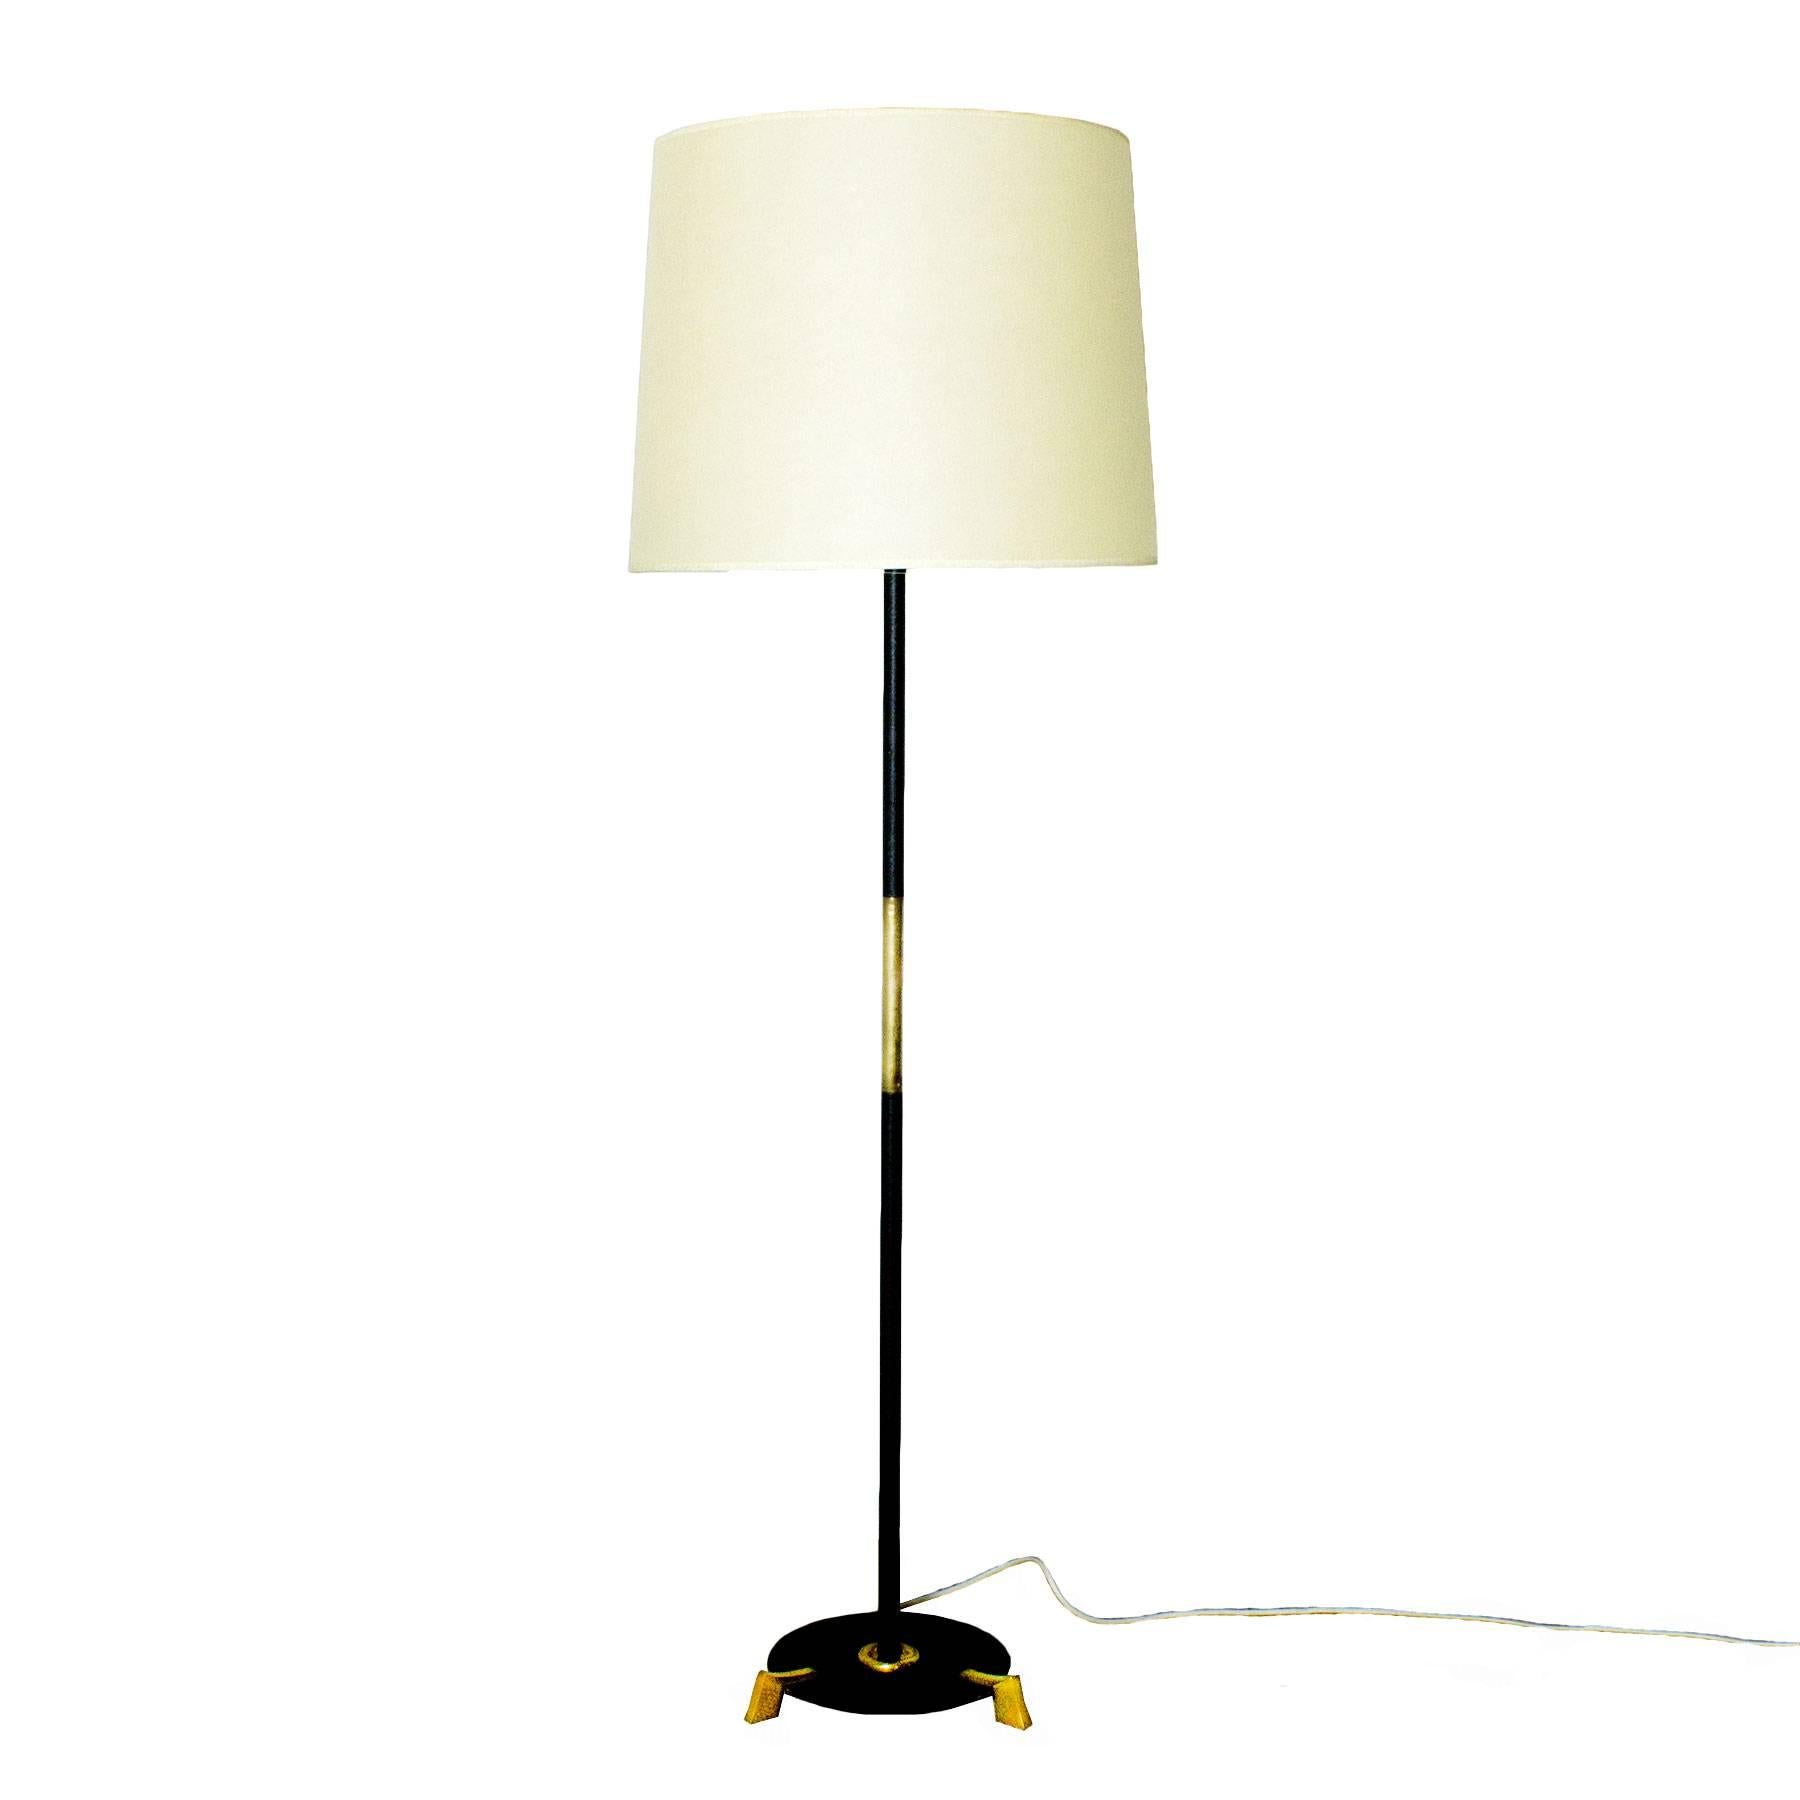 Mid-Century Modern Standing Lamp In Steel, Brass, Fabric - Spain For Sale